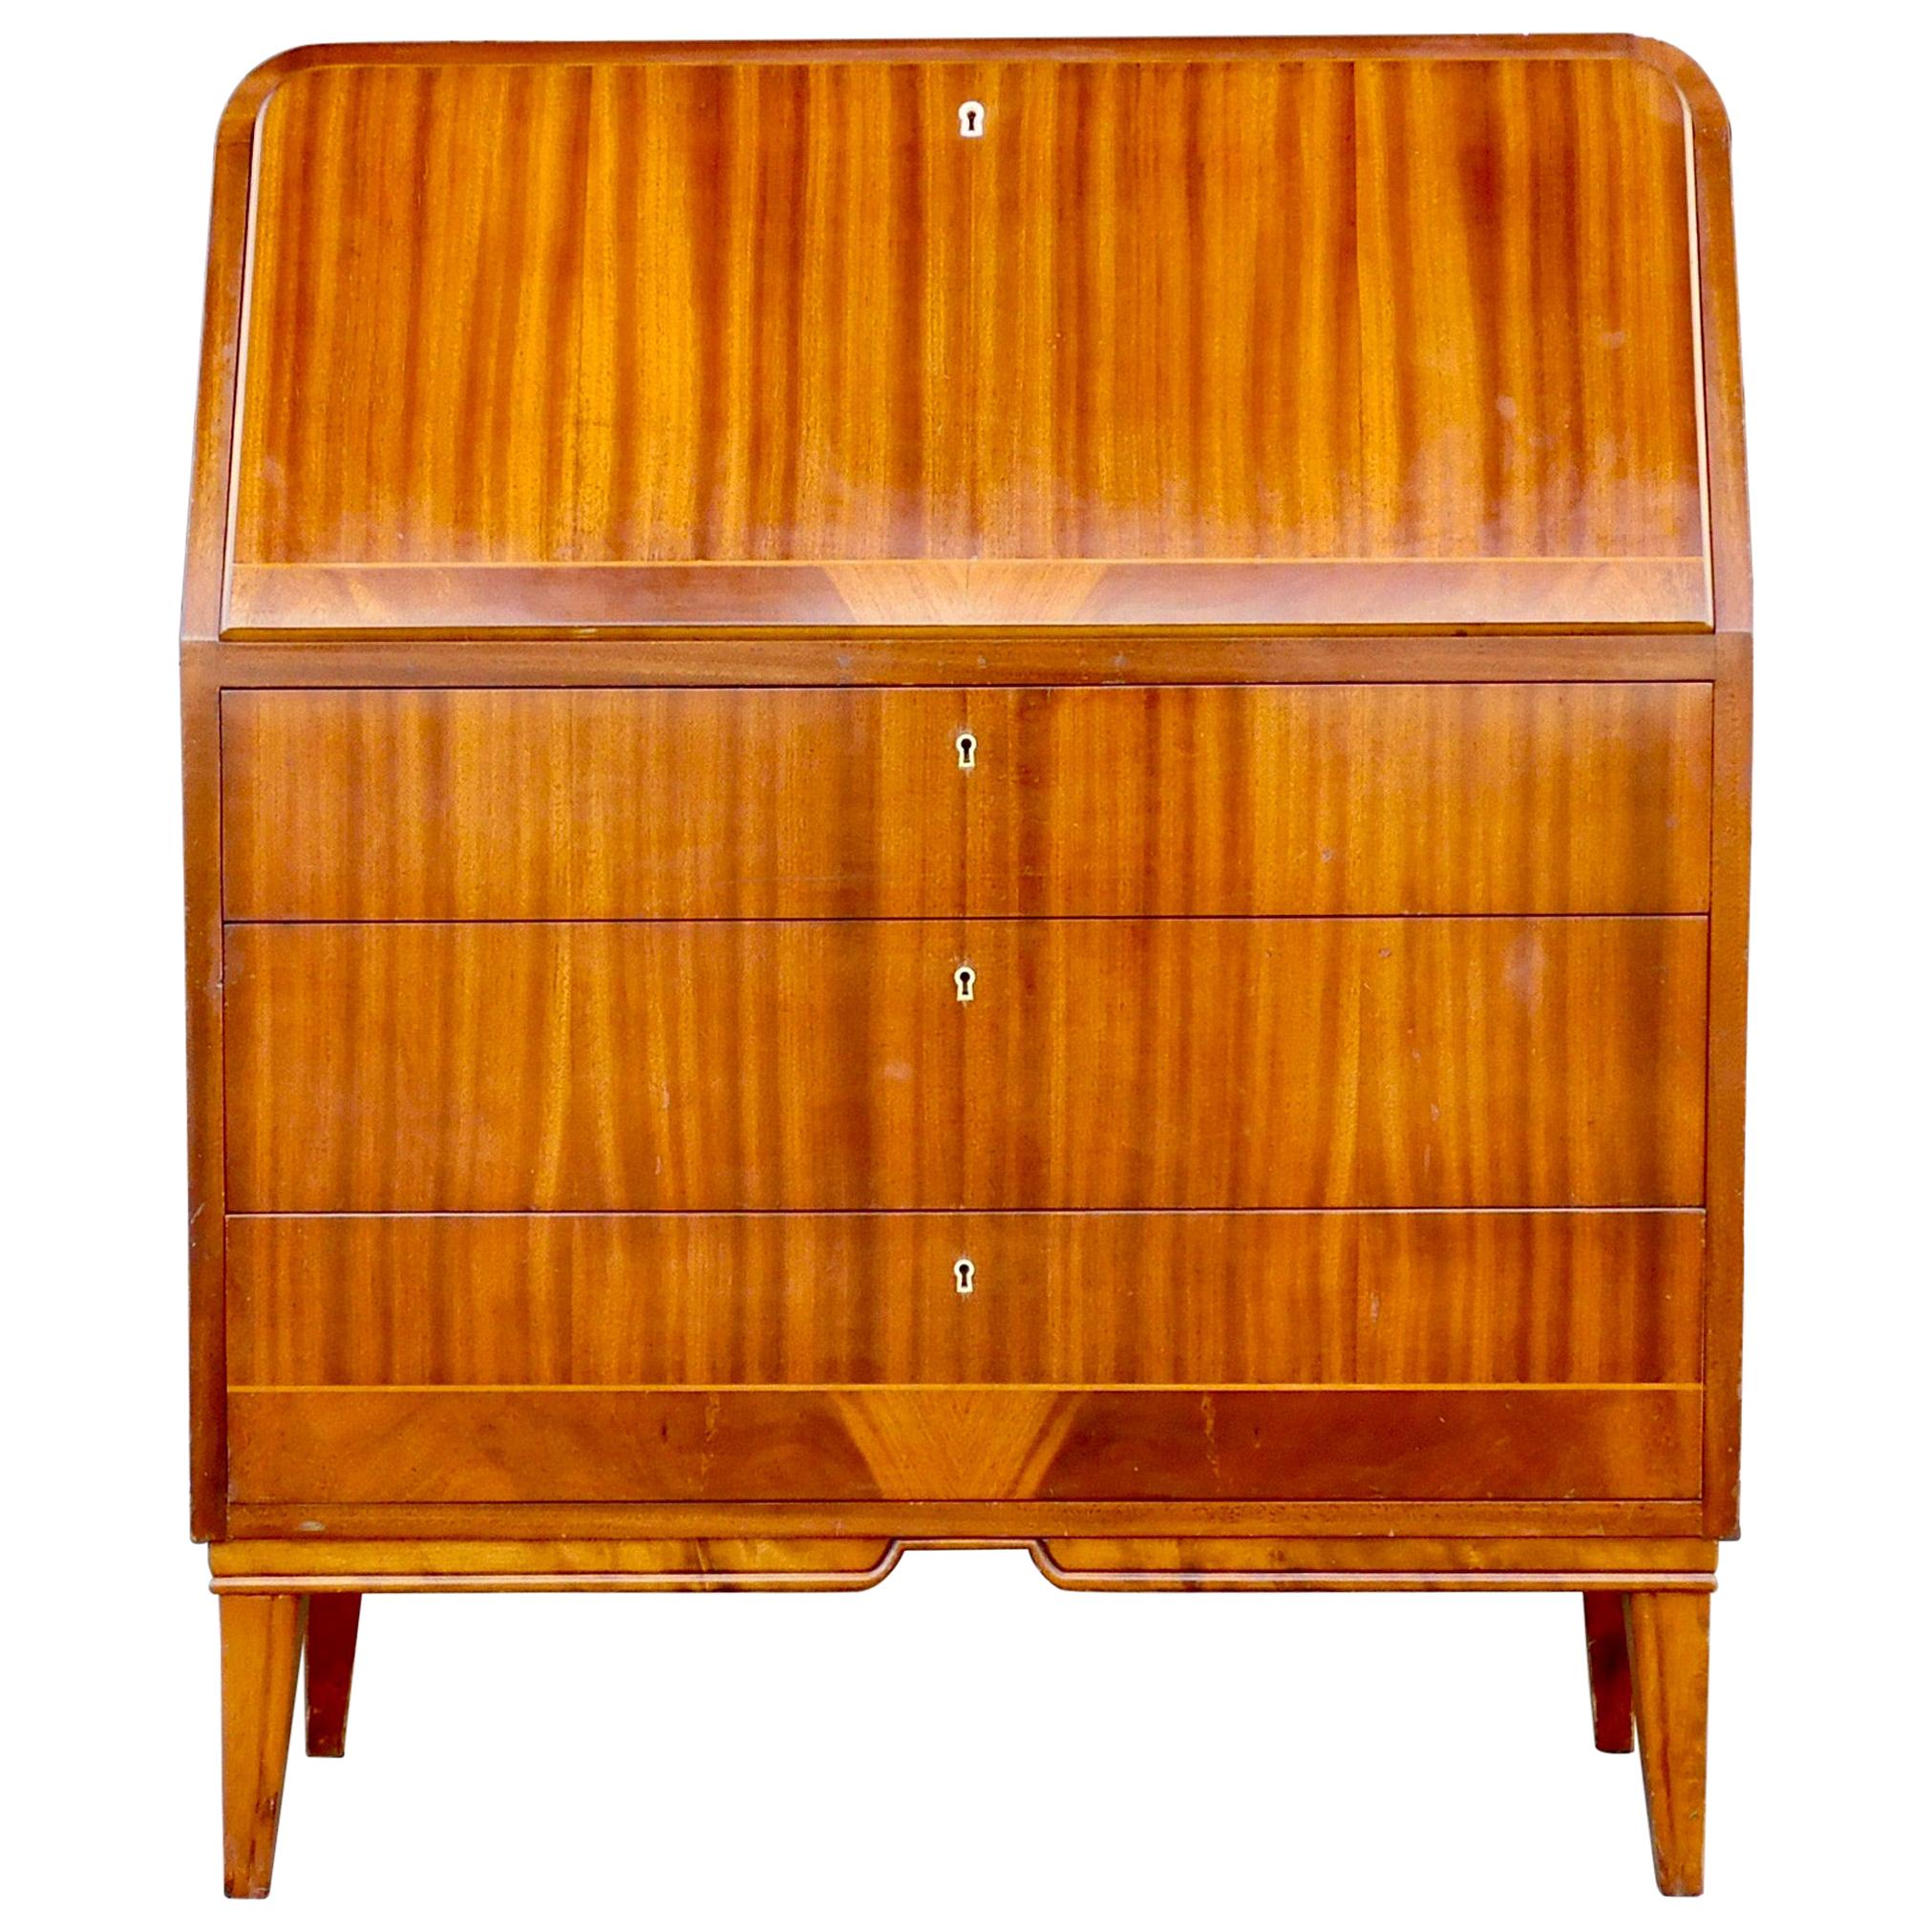 Art Moderne Secretaire Desk with Chest of Drawers in Mahogany, Sweden, 1940s For Sale